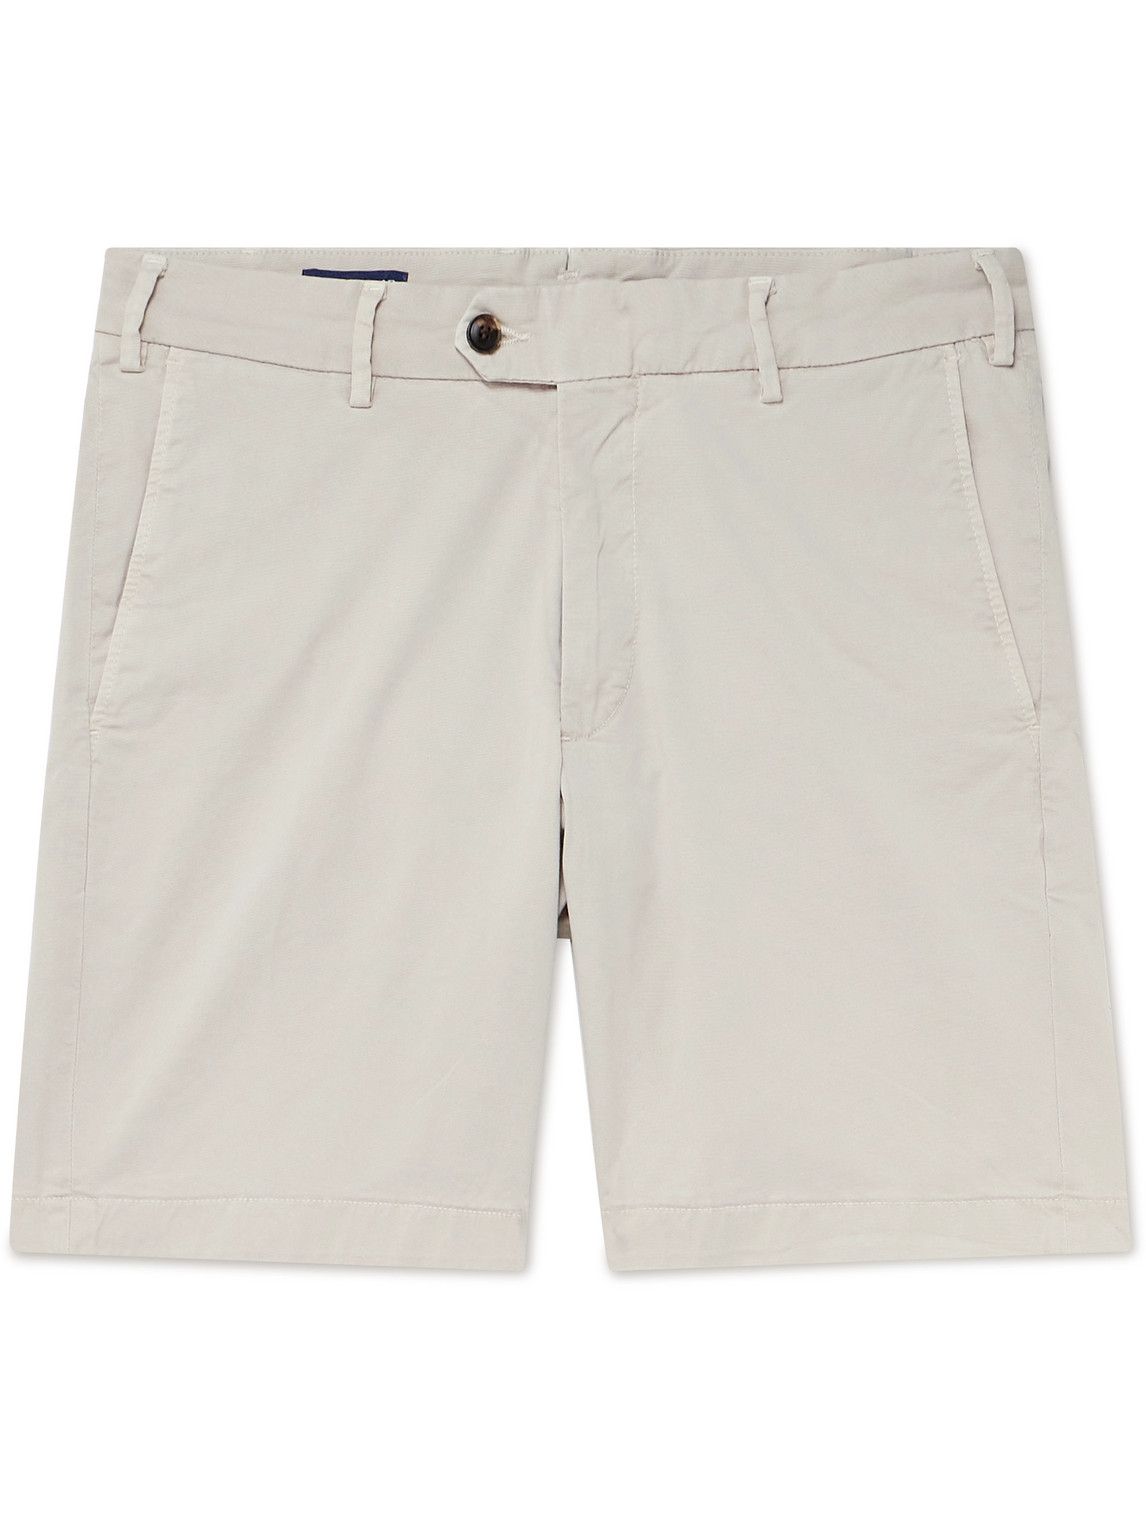 Concorde Garment-Dyed Stretch-Cotton Twill Shorts